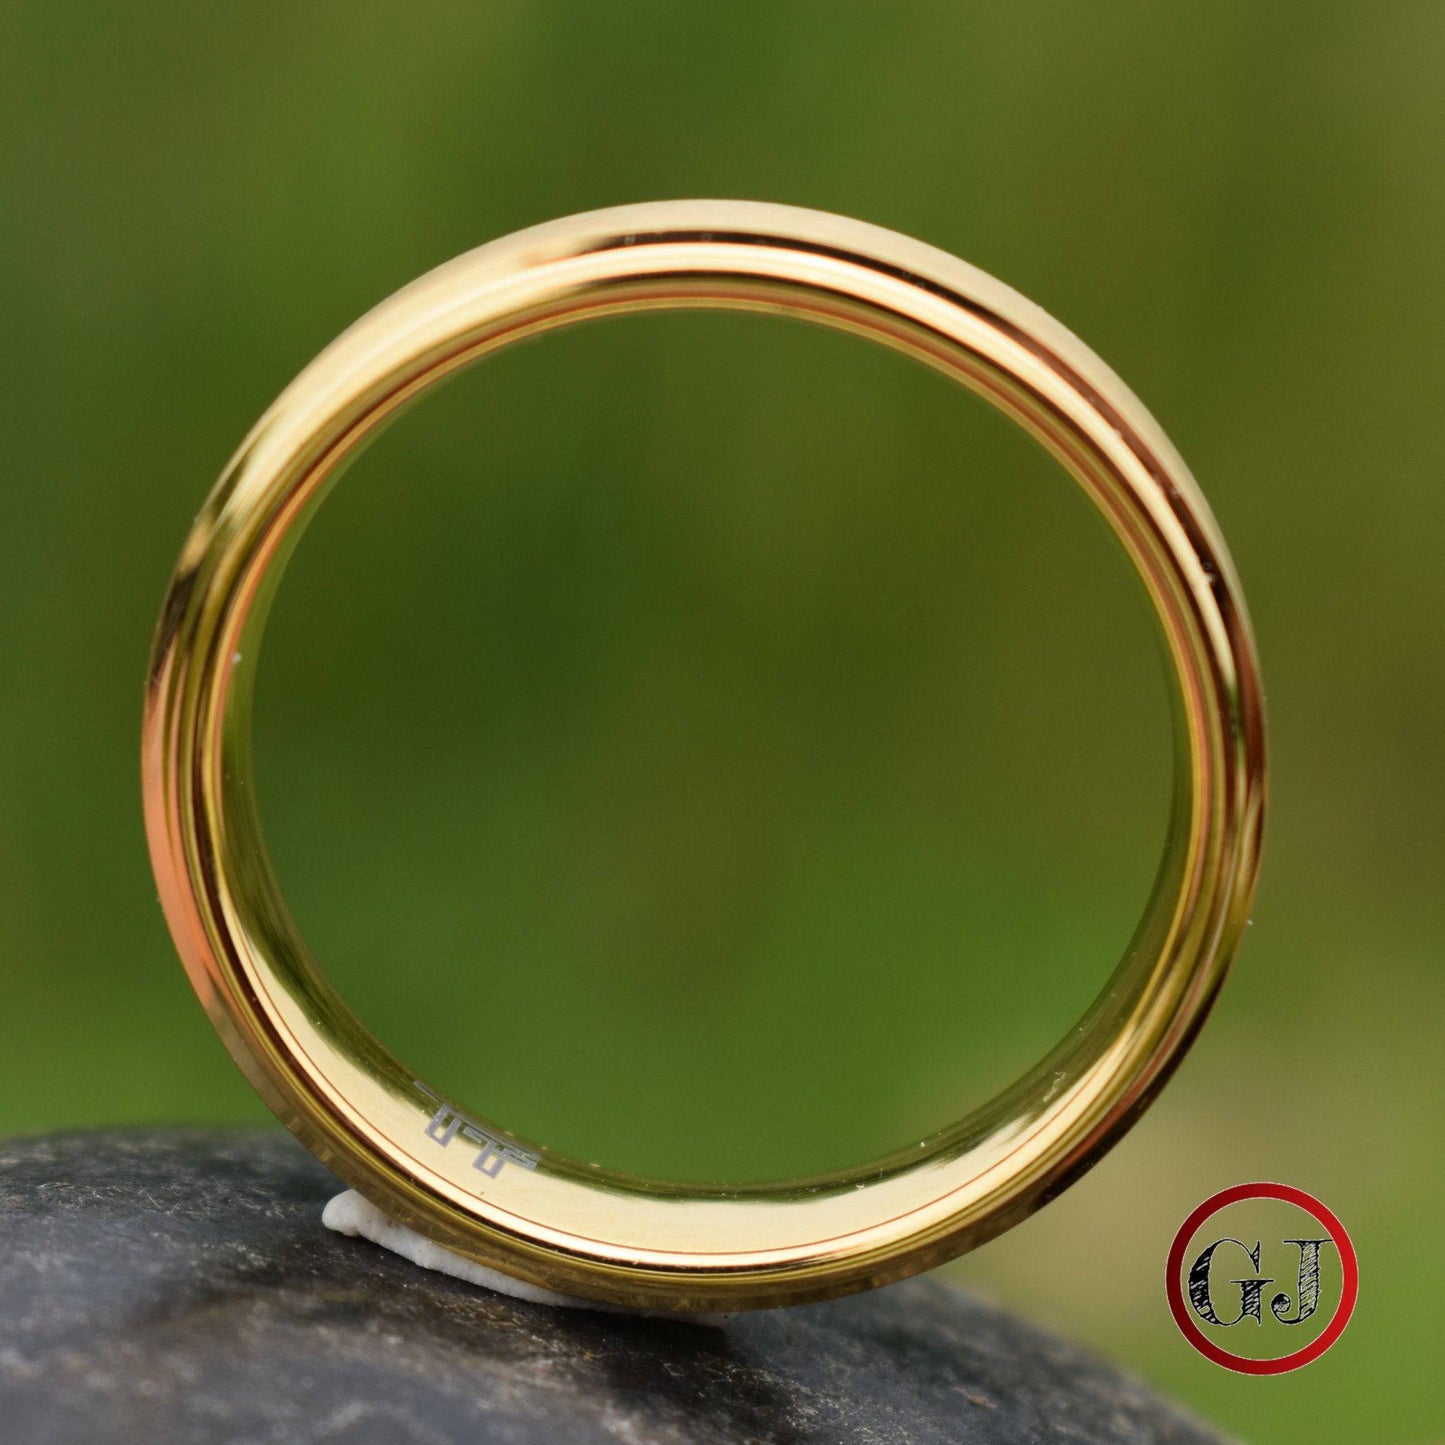 Tungsten 6mm Ring Gold Brushed Centre with a Deep Stepped Edge - Tungsten Titans